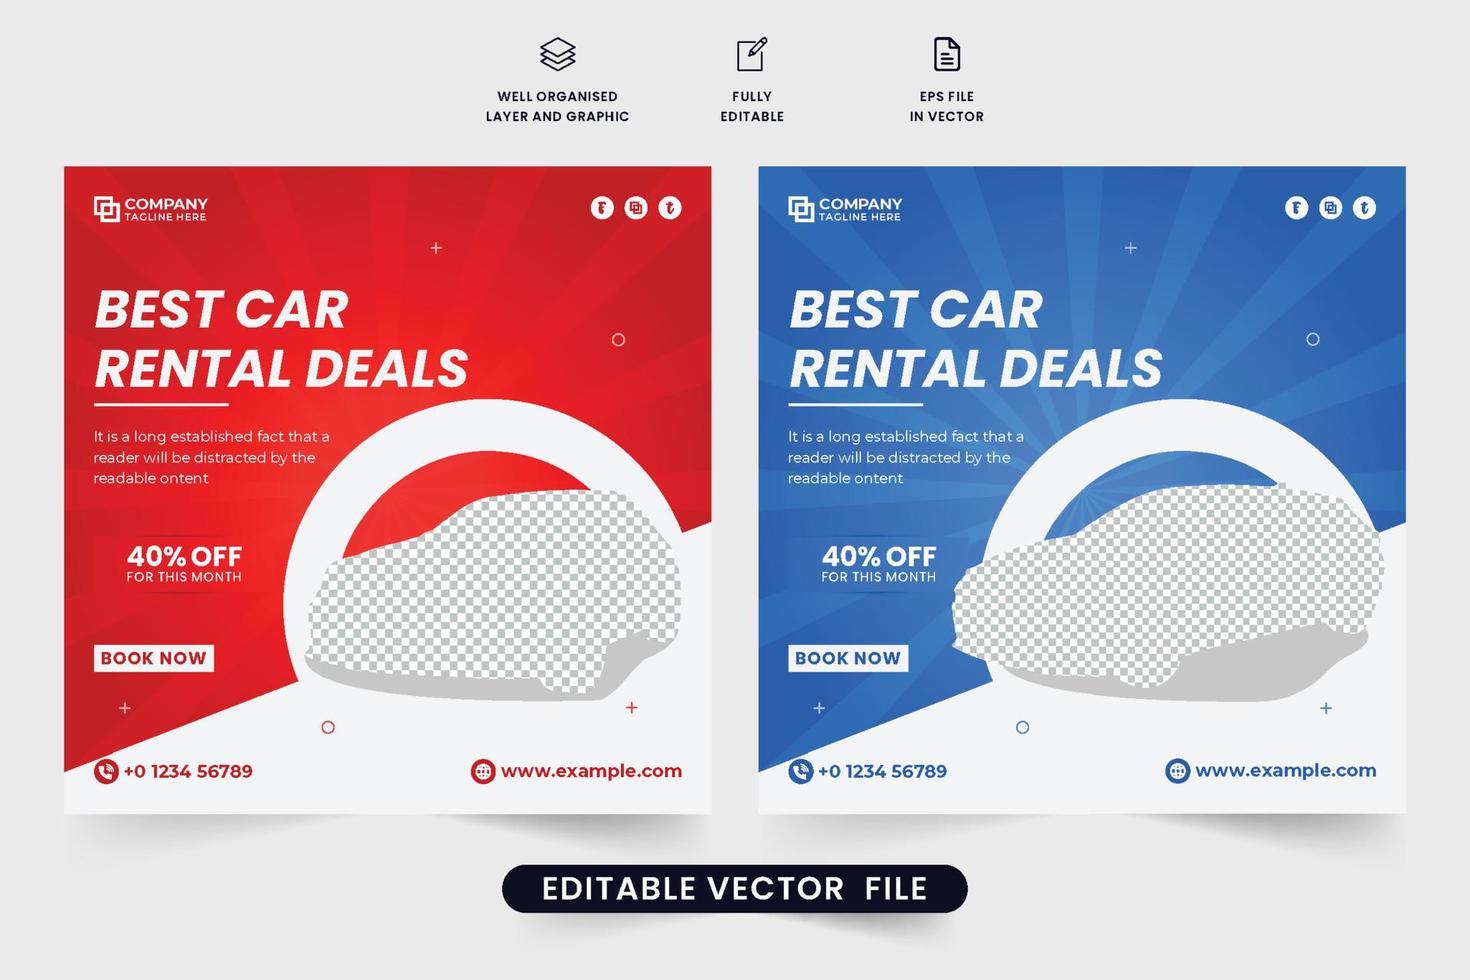 Car rental shop promotion social media post design with blue and red colors. Automobile business advertisement template with creative shapes. Car rental service web banner vector for marketing.